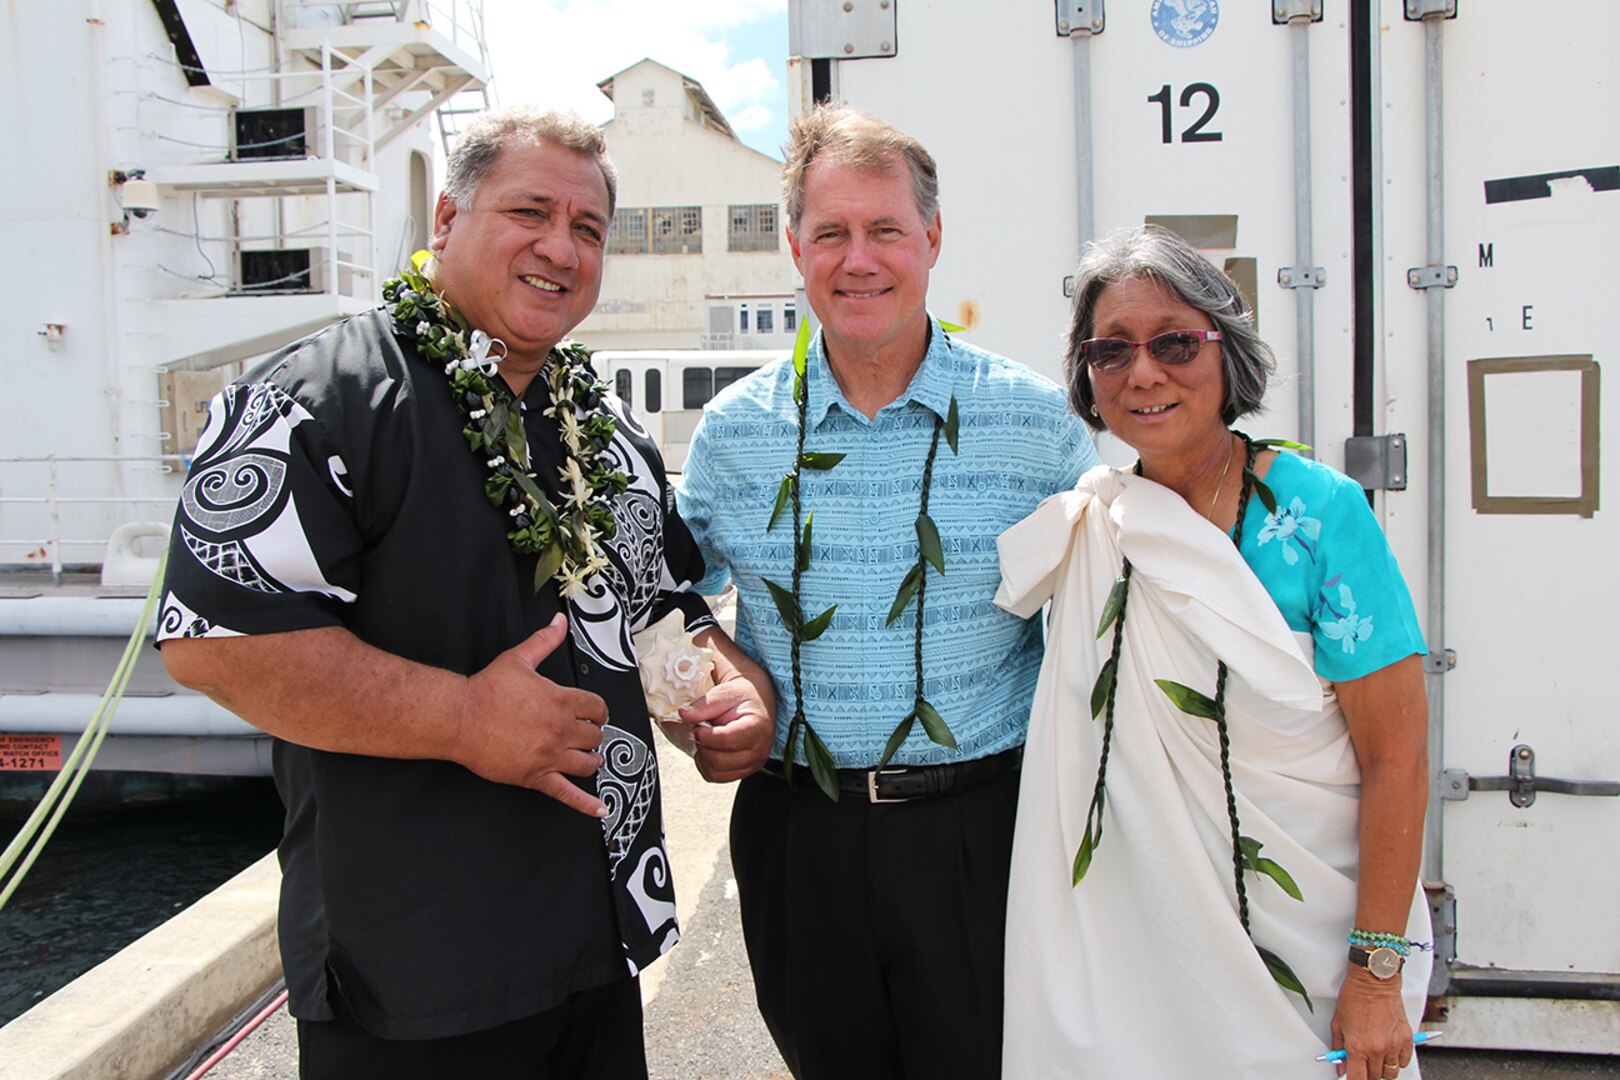 Rep. Ed Case (center), shipyard worker (left), and Ali'i Pauahi Hawaii Civic Club member (right) at Dry Dock One on Aug. 21, 2019.